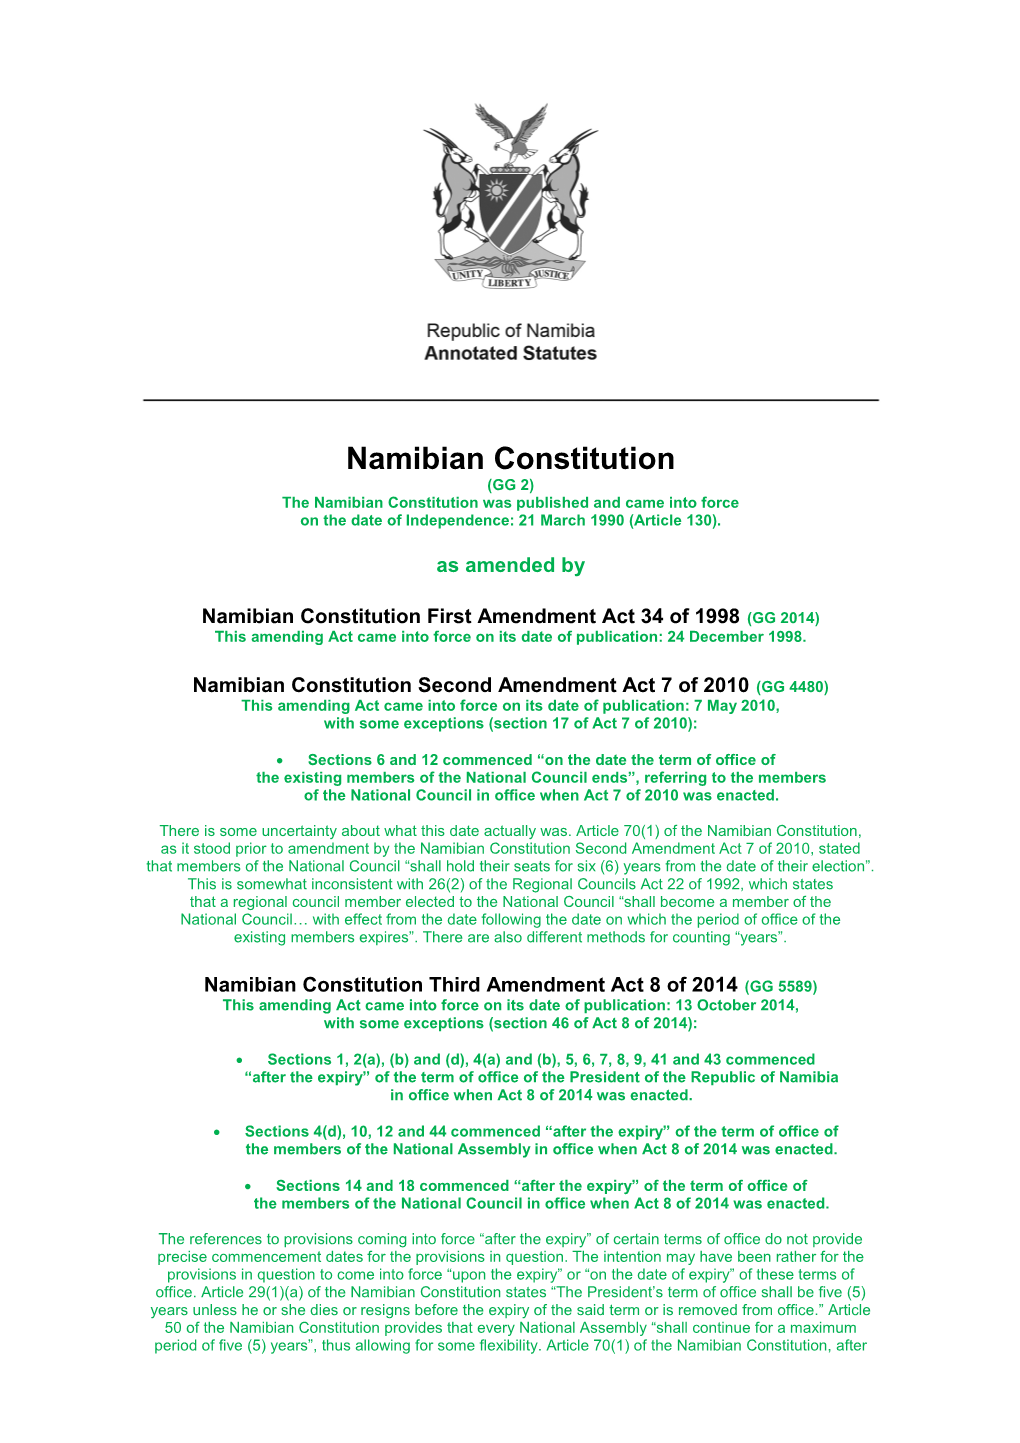 Namibian Constitution (GG 2) the Namibian Constitution Was Published and Came Into Force on the Date of Independence: 21 March 1990 (Article 130)